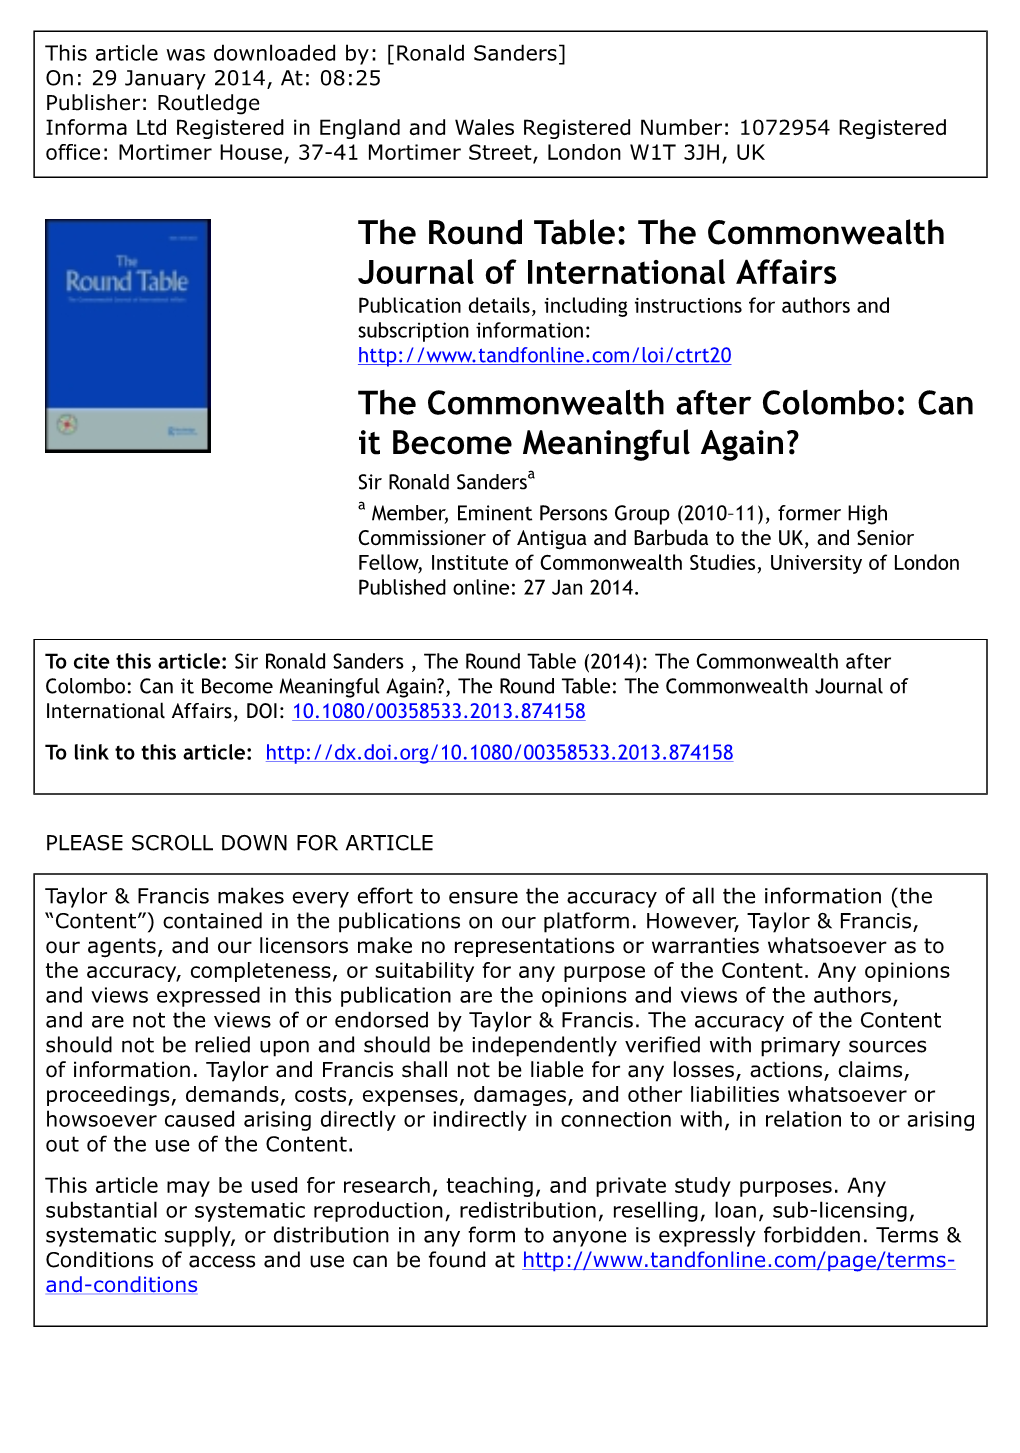 The Commonwealth After Colombo